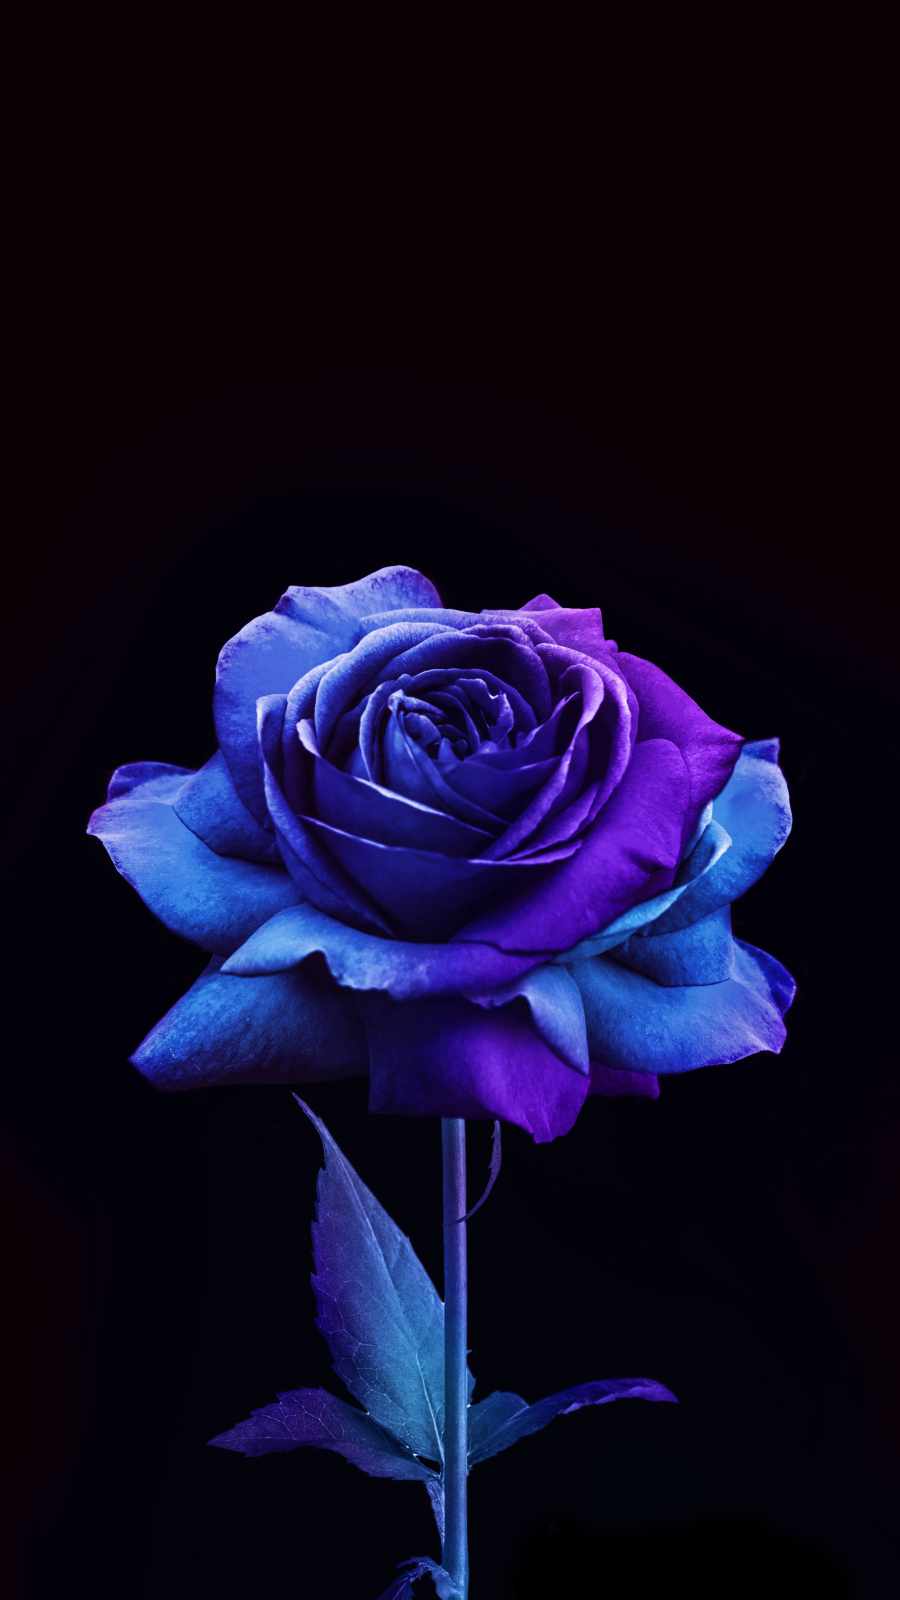 Blue Rose IPhone Wallpaper HD - IPhone Wallpapers : iPhone Wallpapers